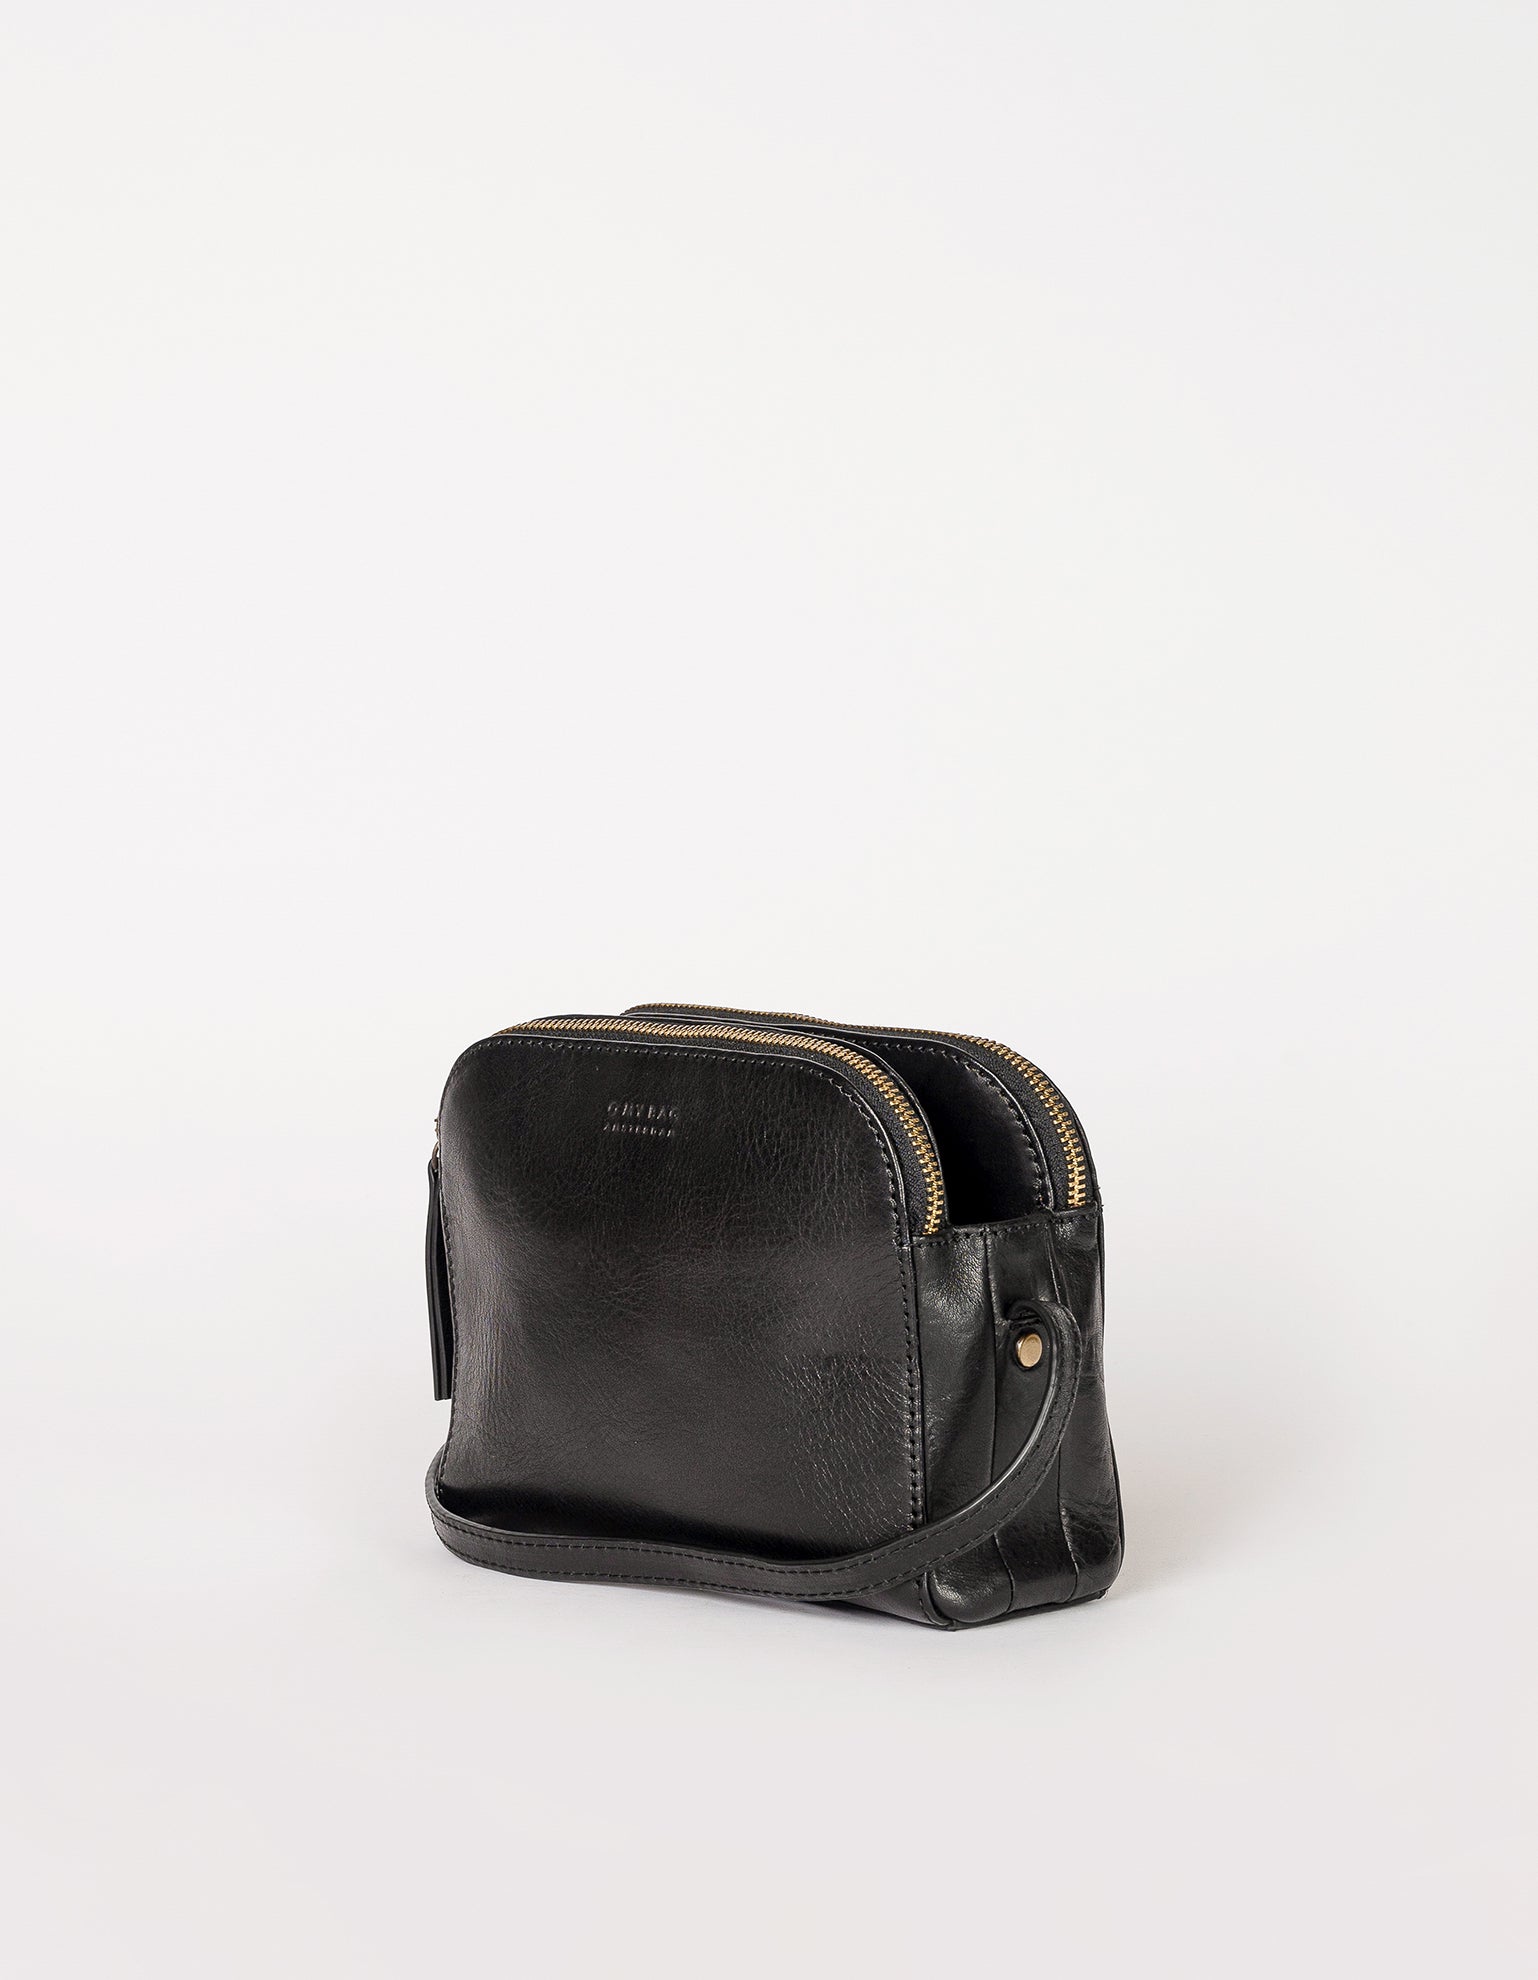 Black Leather womens handbag. Square shape with an adjustable strap. Side product image. 